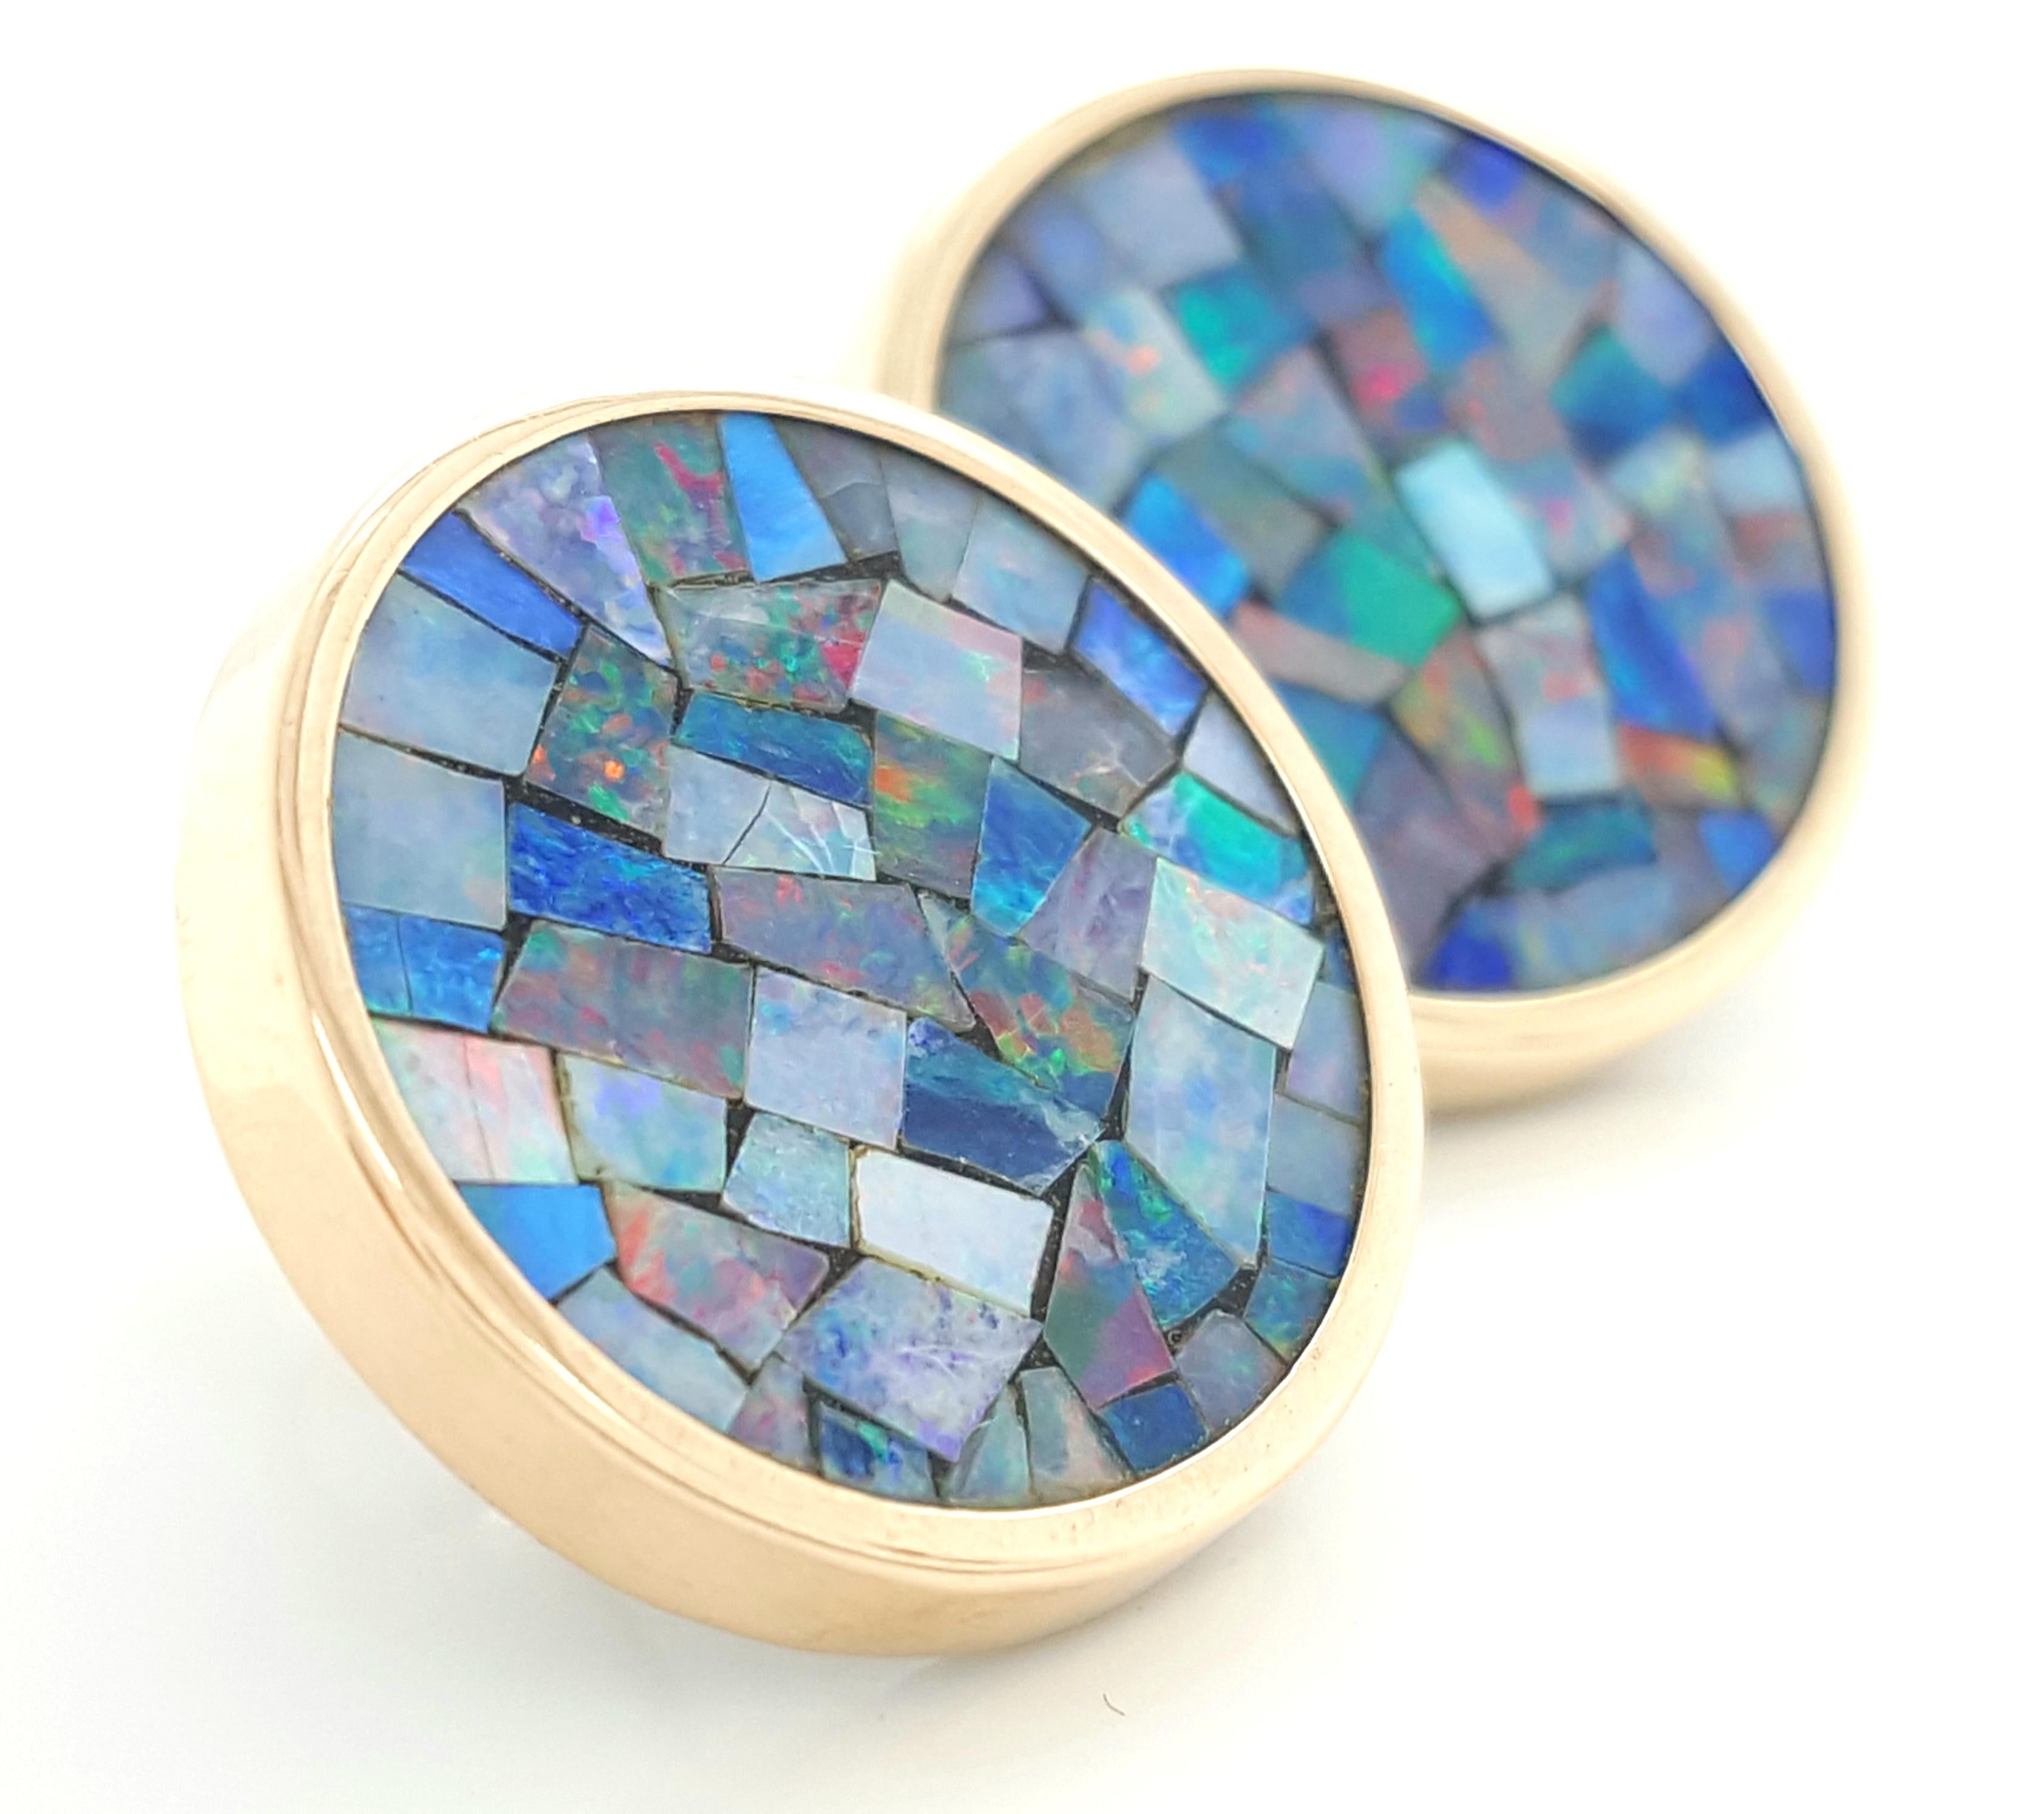 Classic Mosaic Opal earrings with High Polished 14 Karat Yellow Gold Bezels.  These earrings feature a memorizing display of  opals in a mosaic pattern set in a high polished bezel.  16.52 mm in diameter.  Completed by posts and frictions